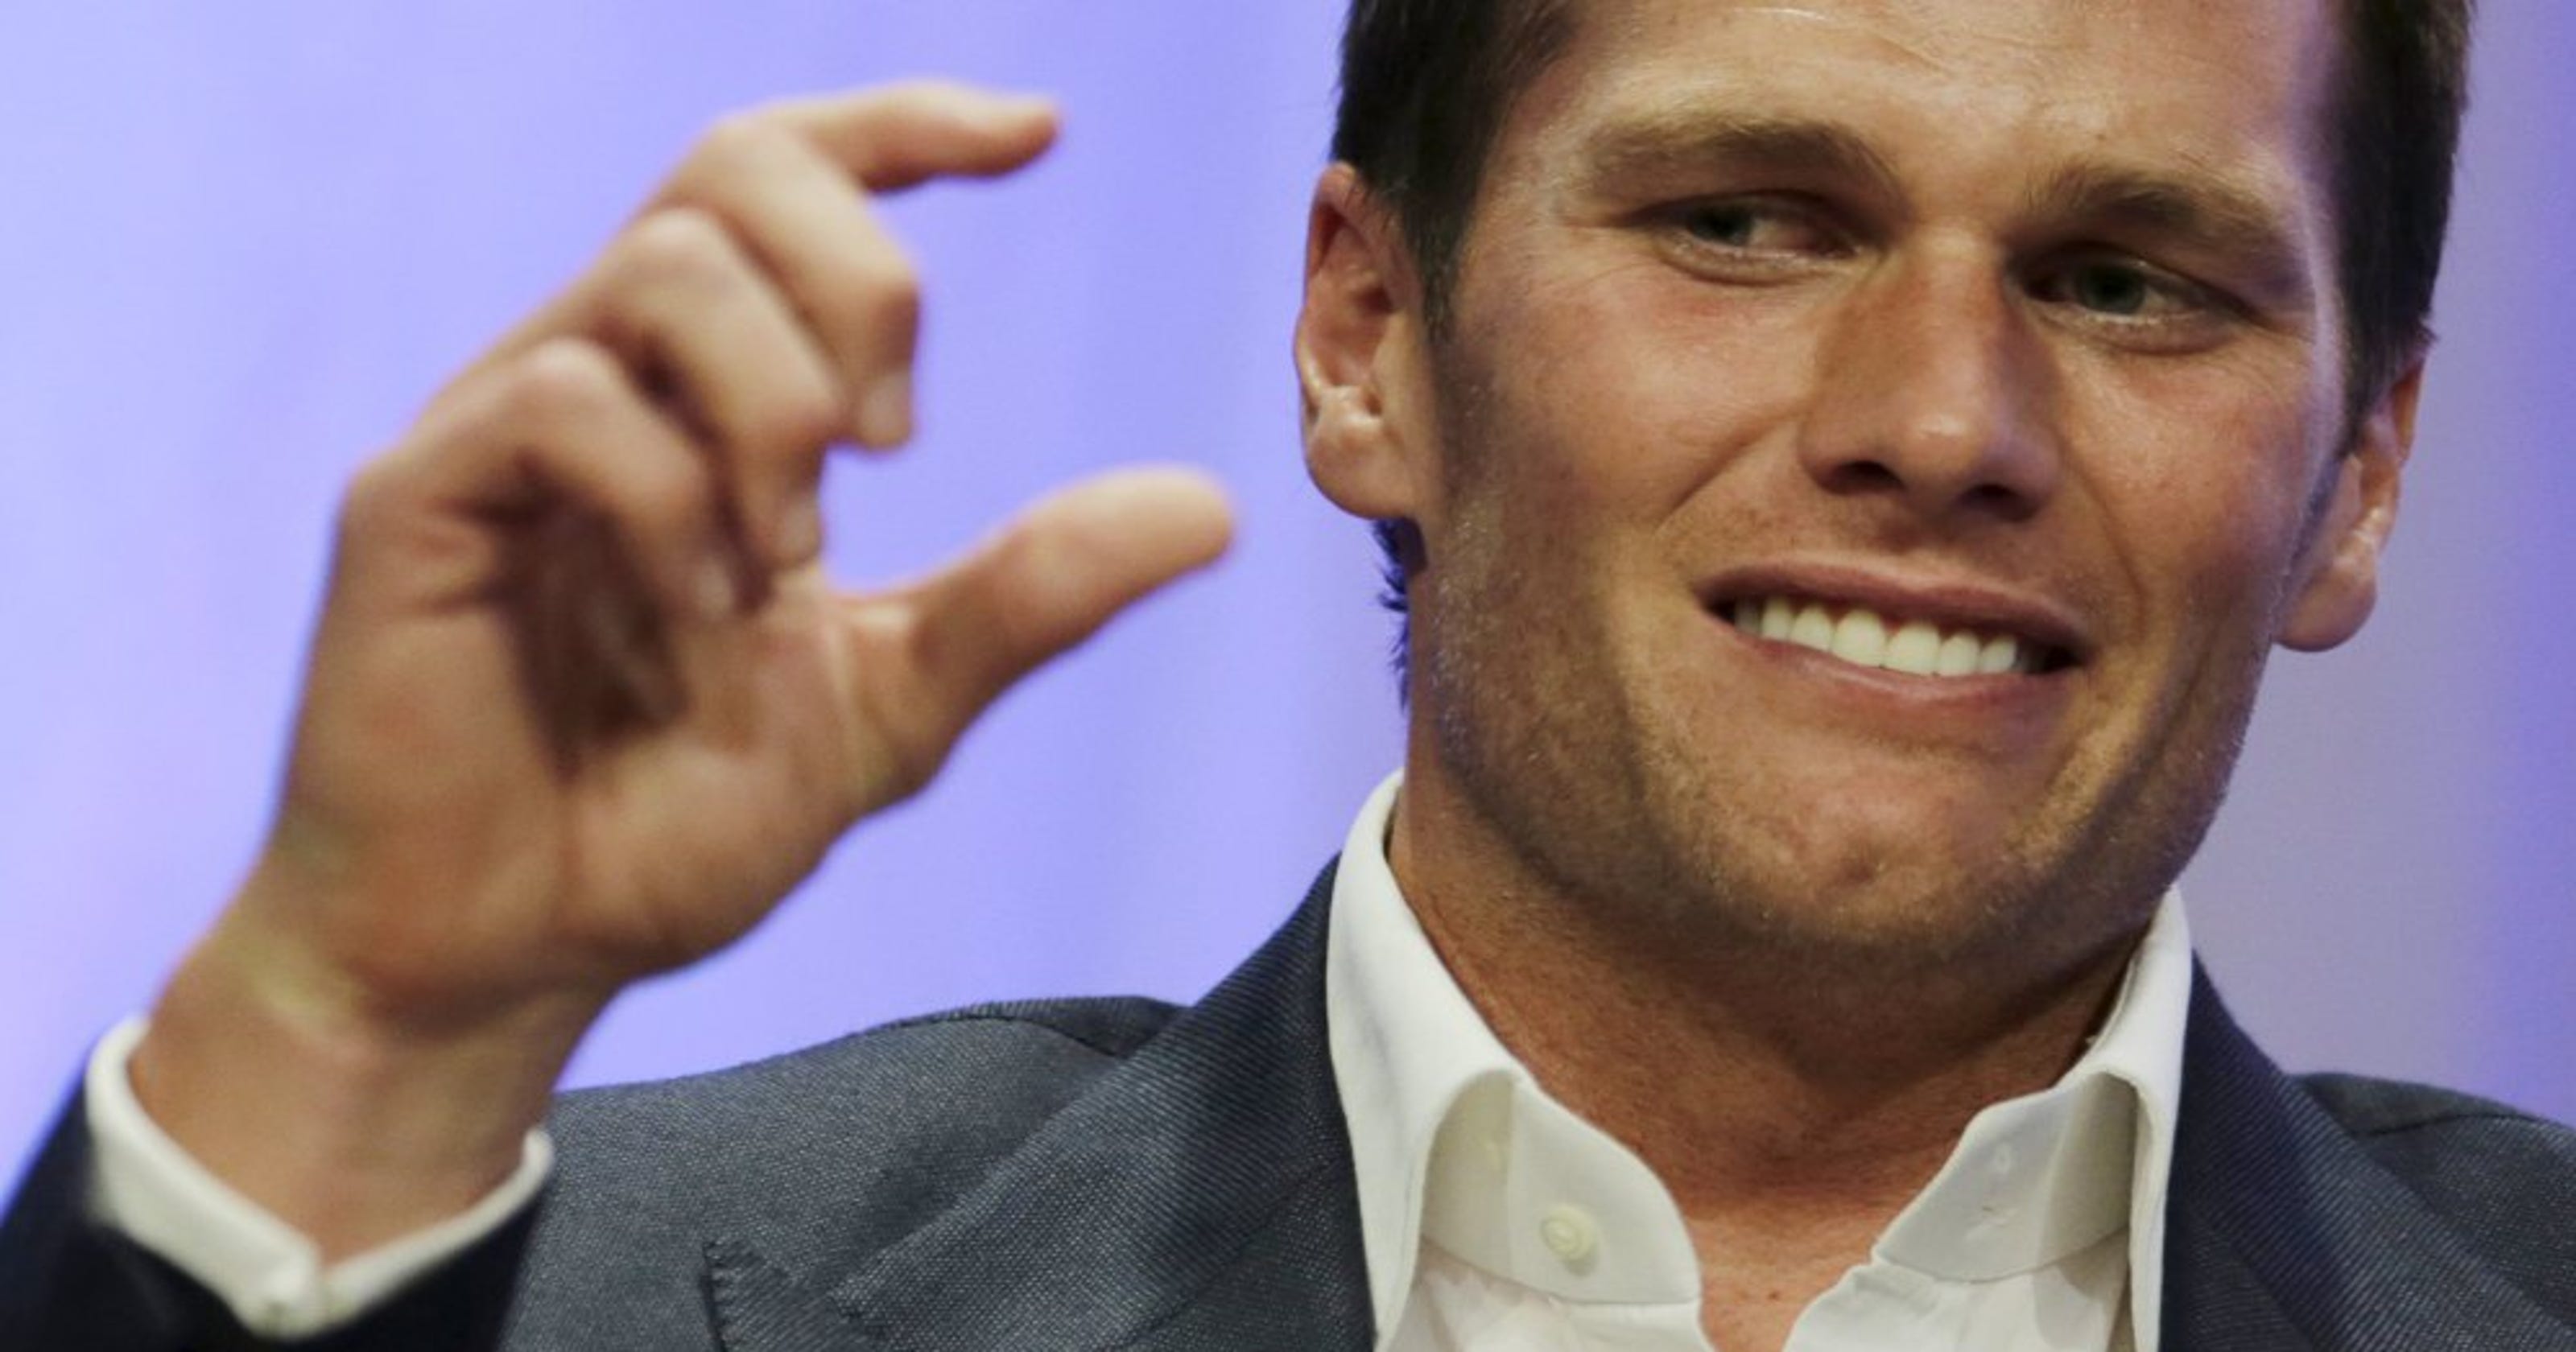 Tom Brady gets crushed by anti-Trump supporters